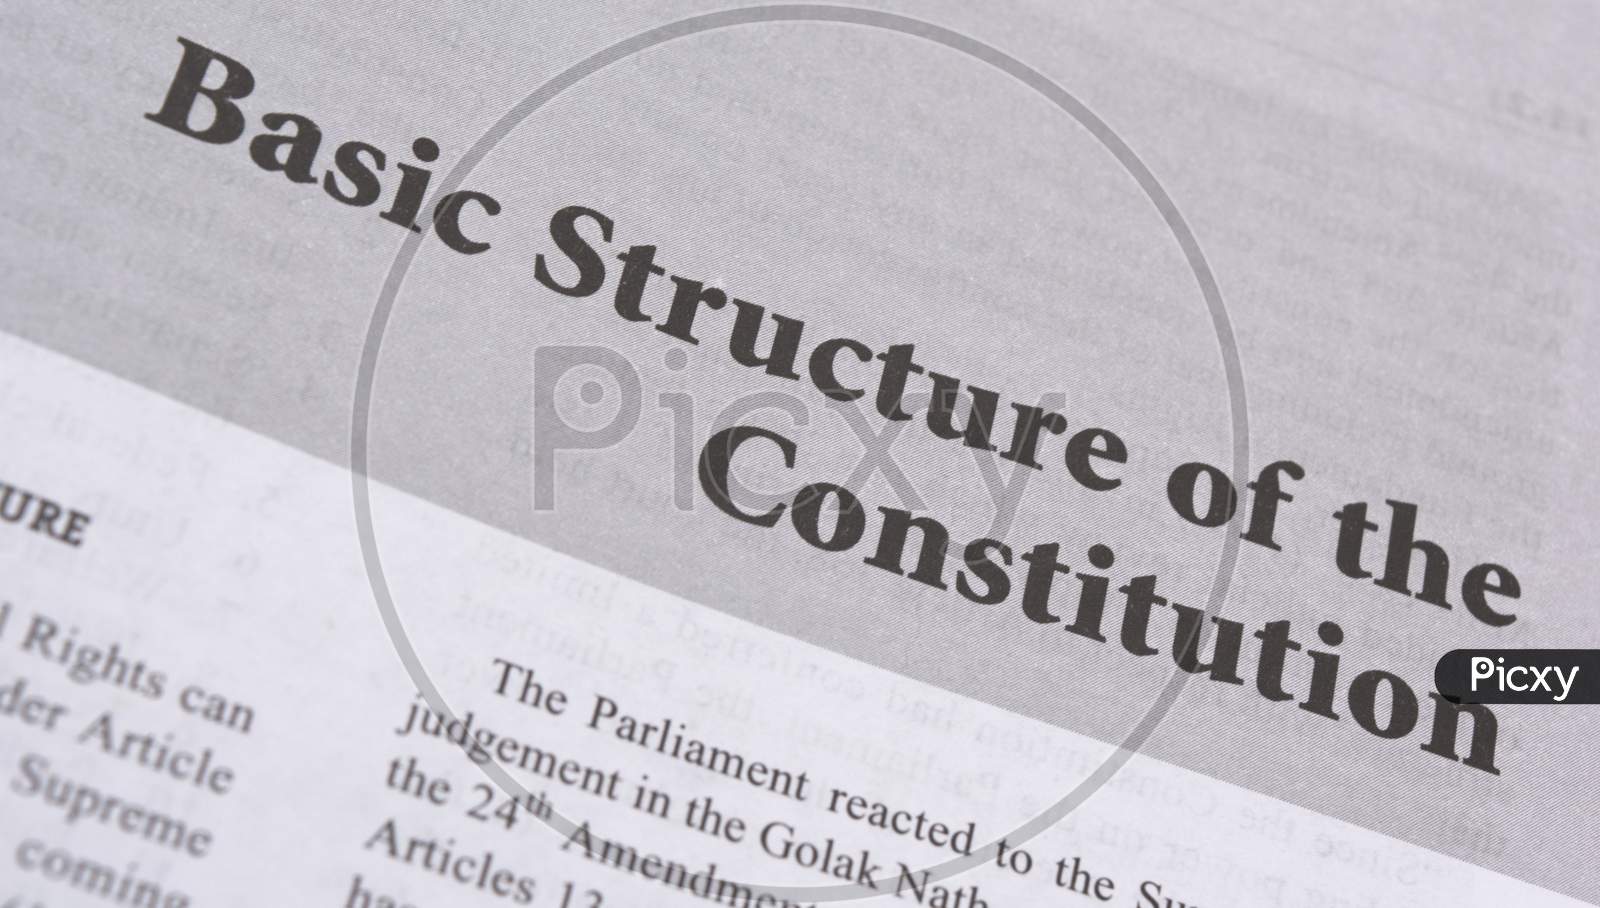 Basic Structure Of The Constitution Printed On Book With Large Letters.